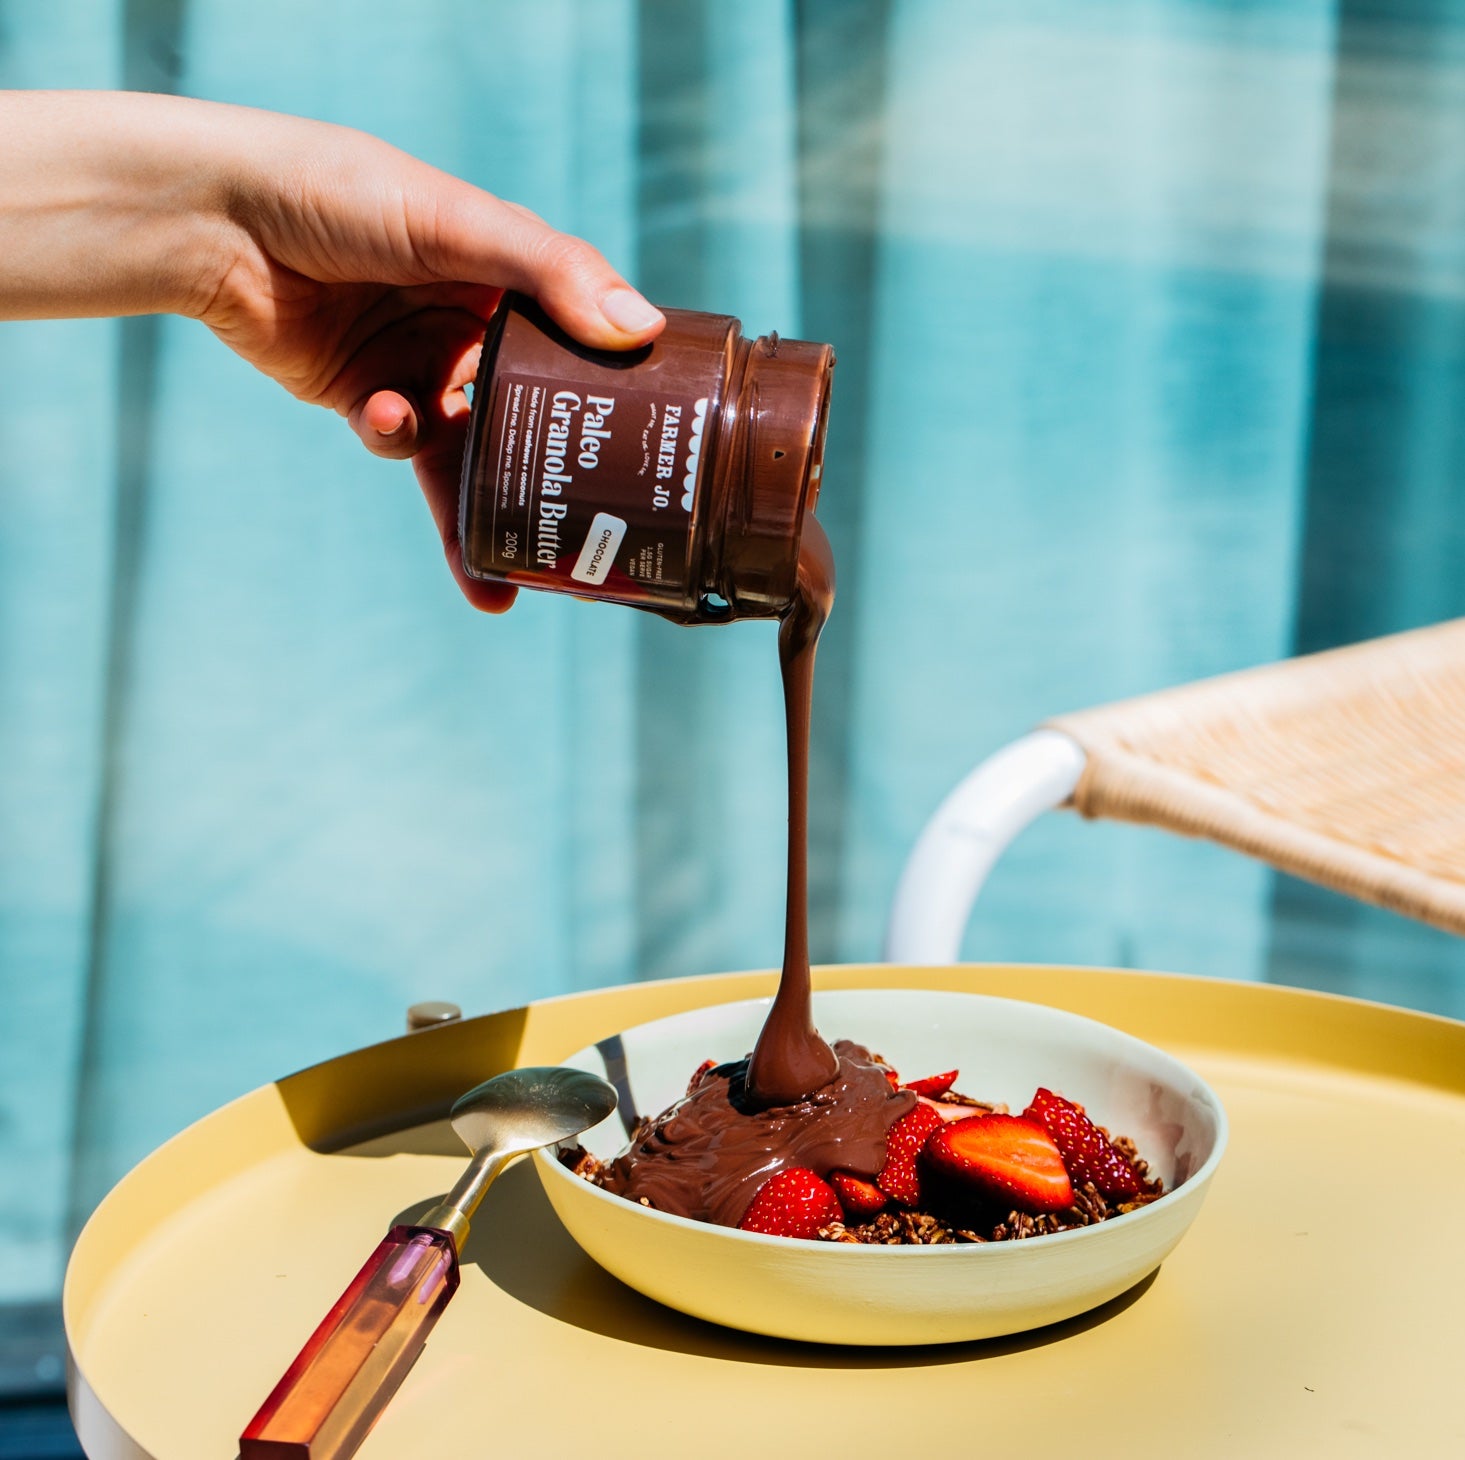 Curb your choccie cravings with our Chocolate and Coconut Paleo Granola Butter